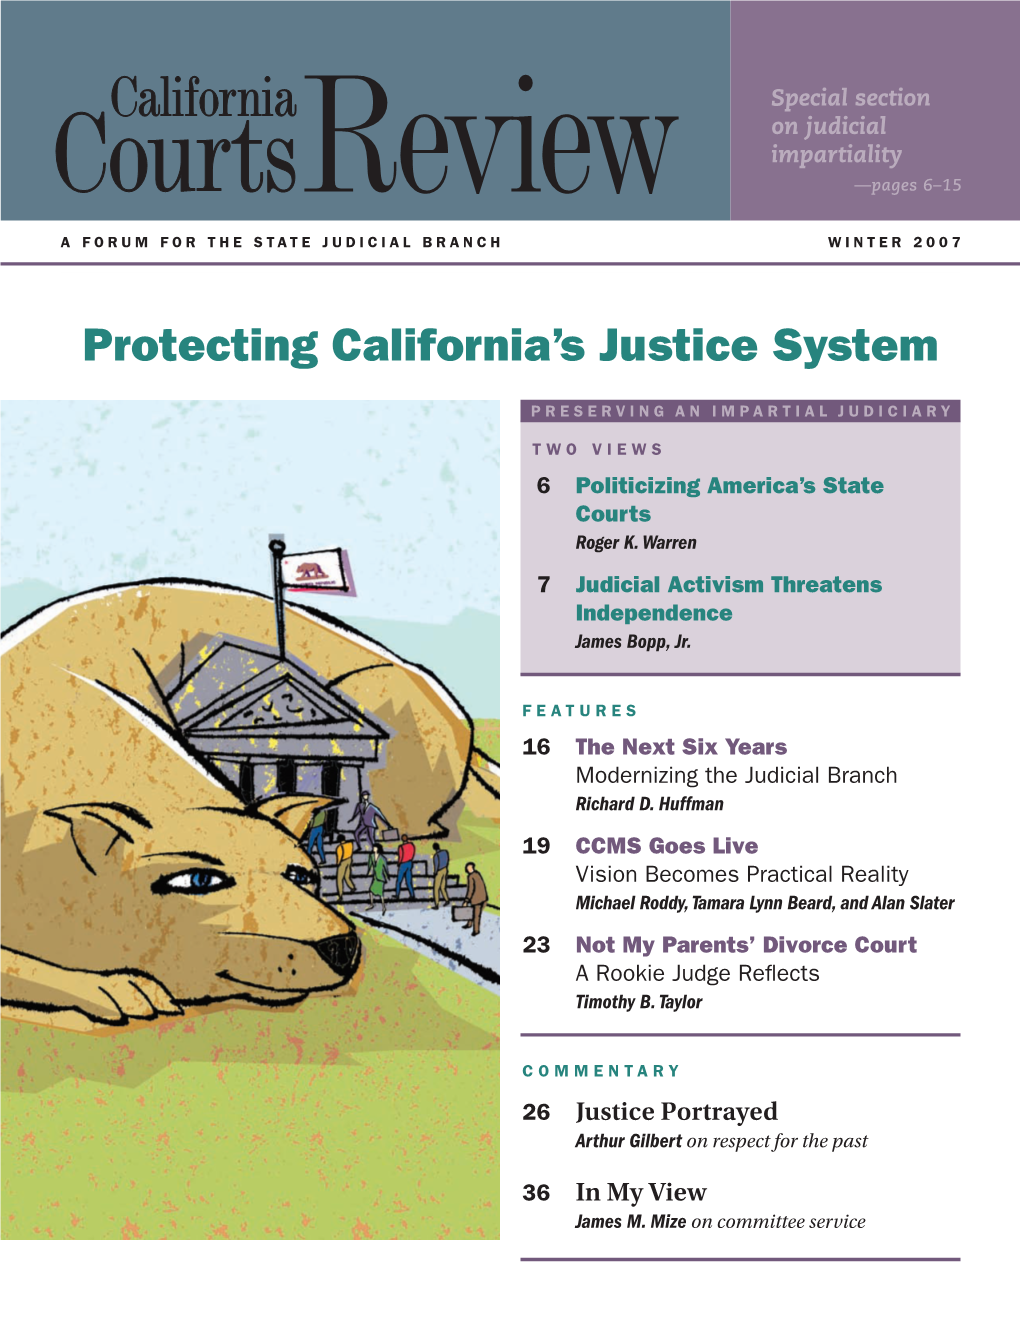 Protecting California's Justice System